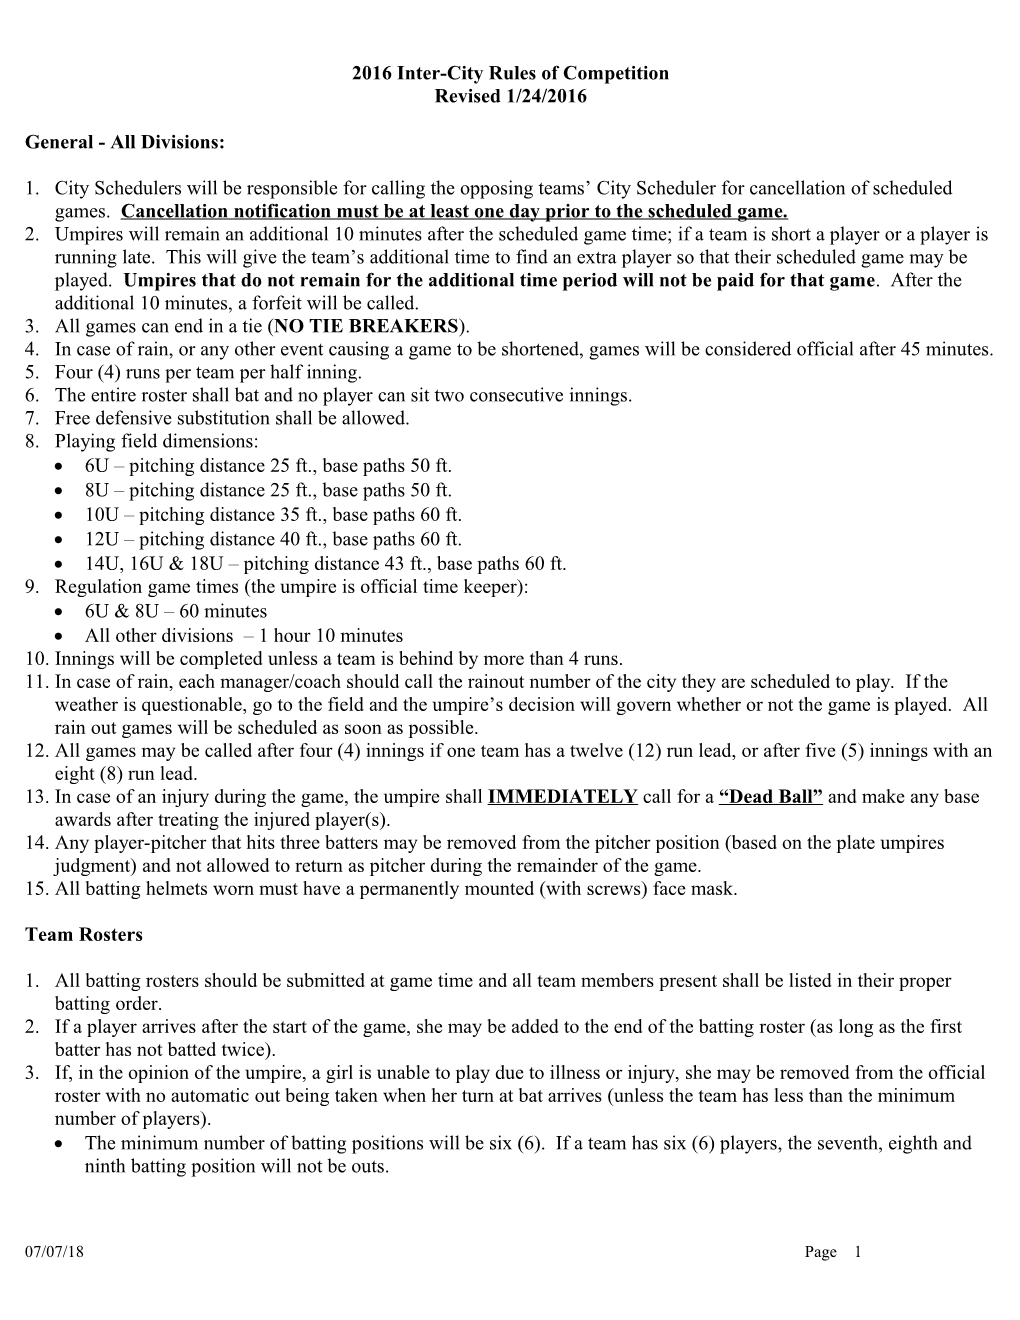 1999 Inter-City Rules of Competition